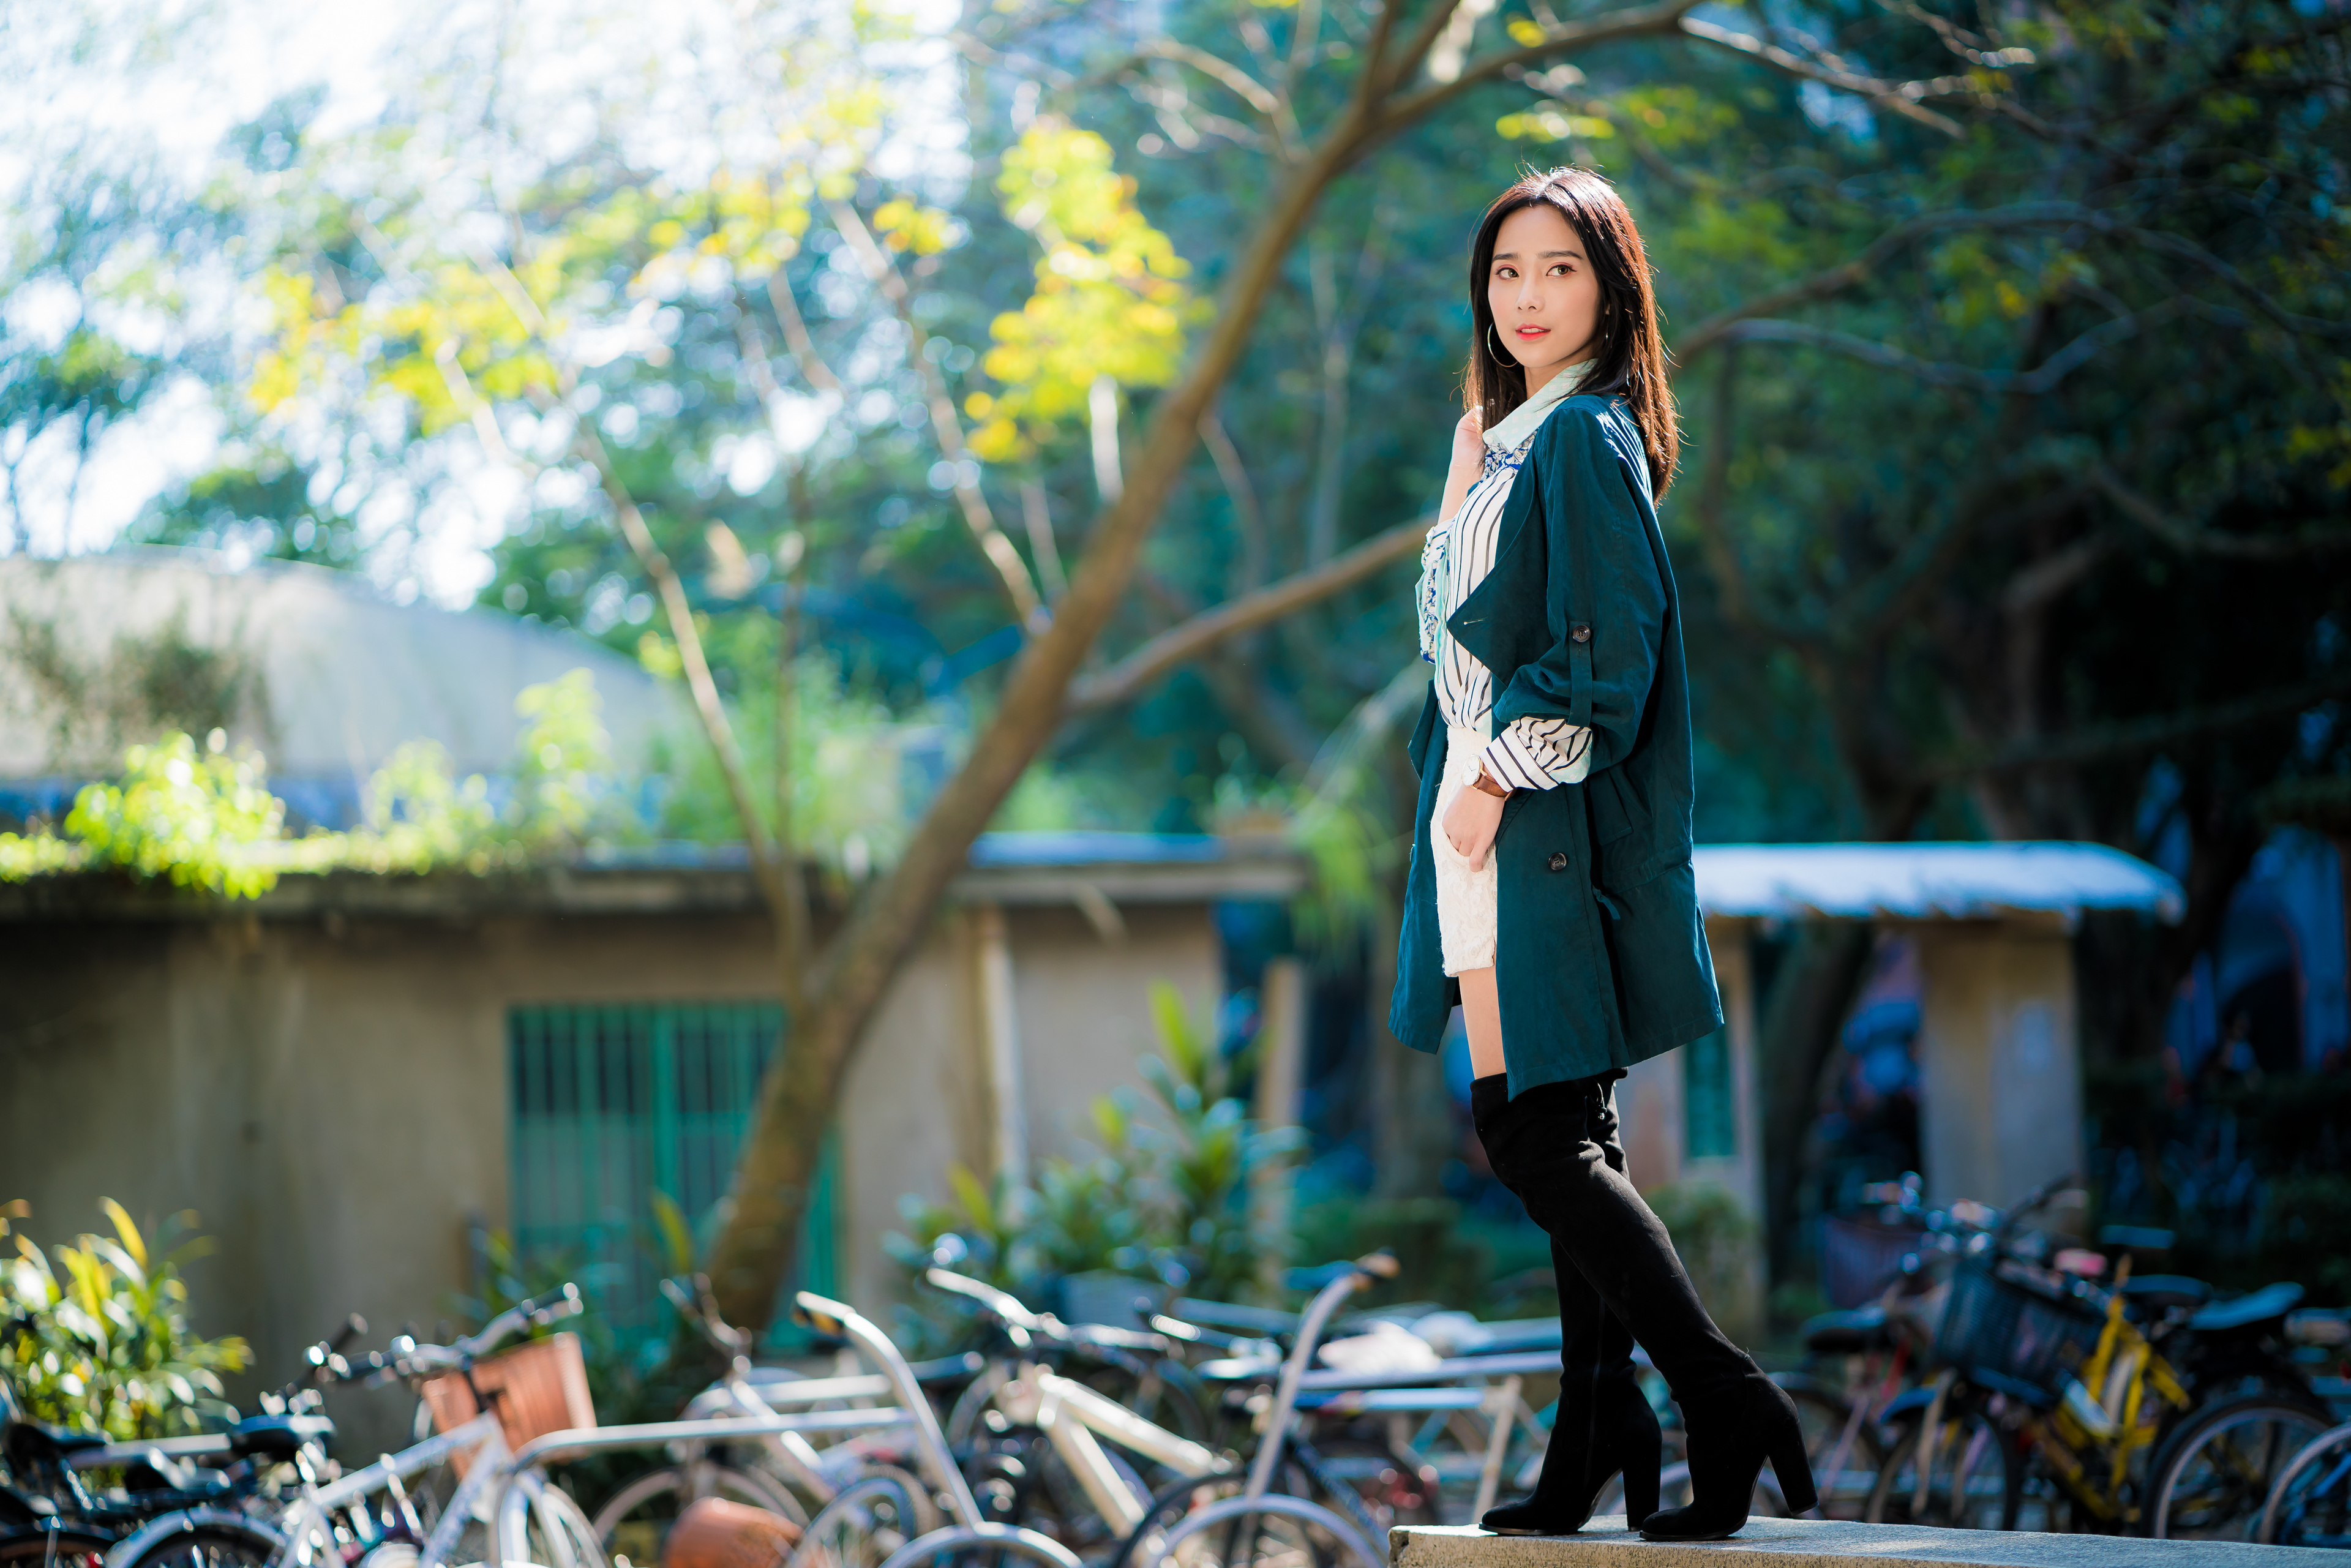 People 3840x2561 Asian model women long hair brunette knee-high boots depth of field bicycle building earring blouses coats white skirt wristwatch women outdoors boots